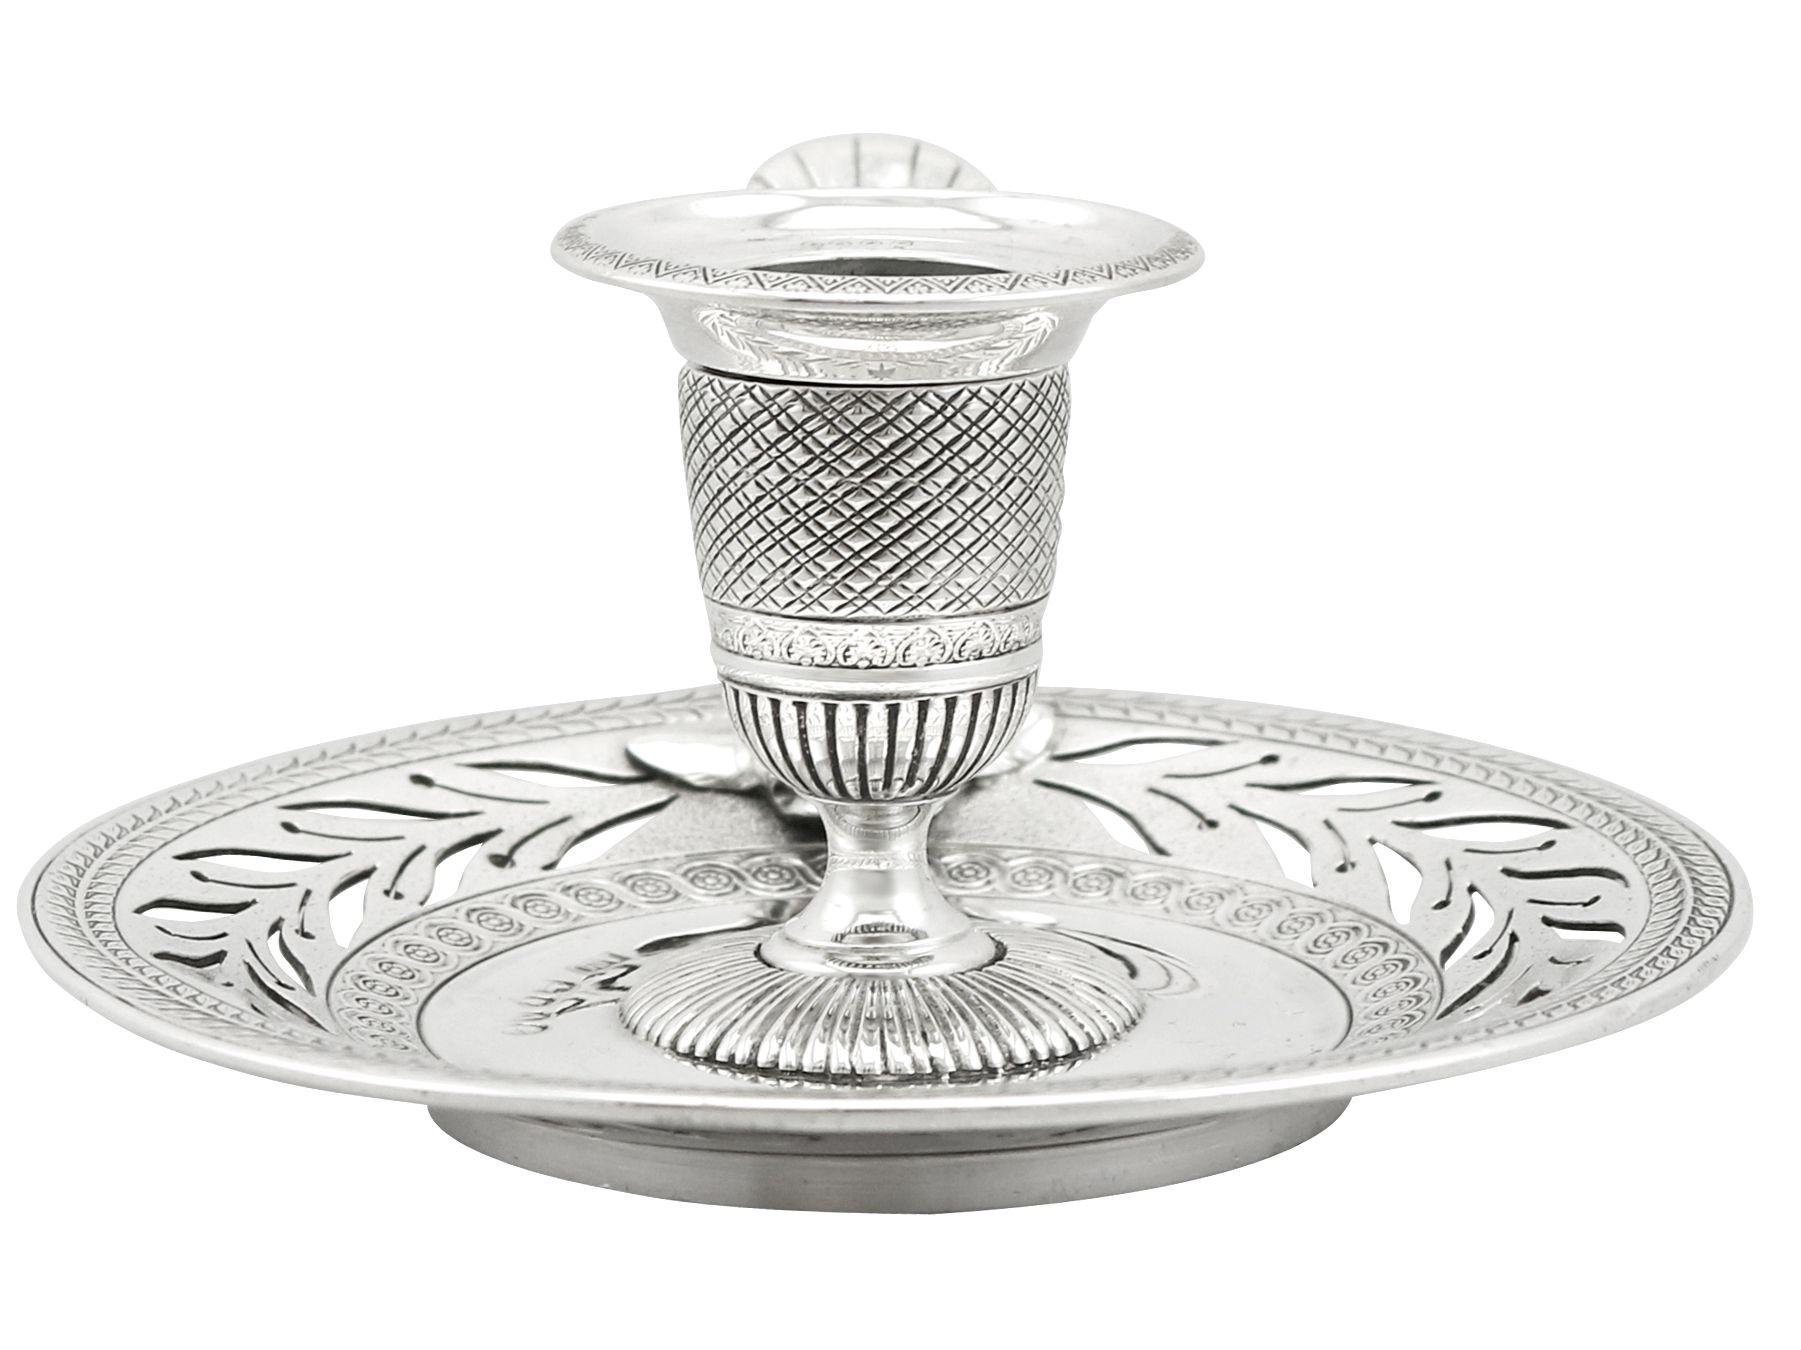 An exceptional, fine and impressive antique Victorian English sterling silver chamber candlestick; part of our range of ornamental silverware

This exceptional antique Victorian sterling silver chamberstick has a circular rounded form.

The cast